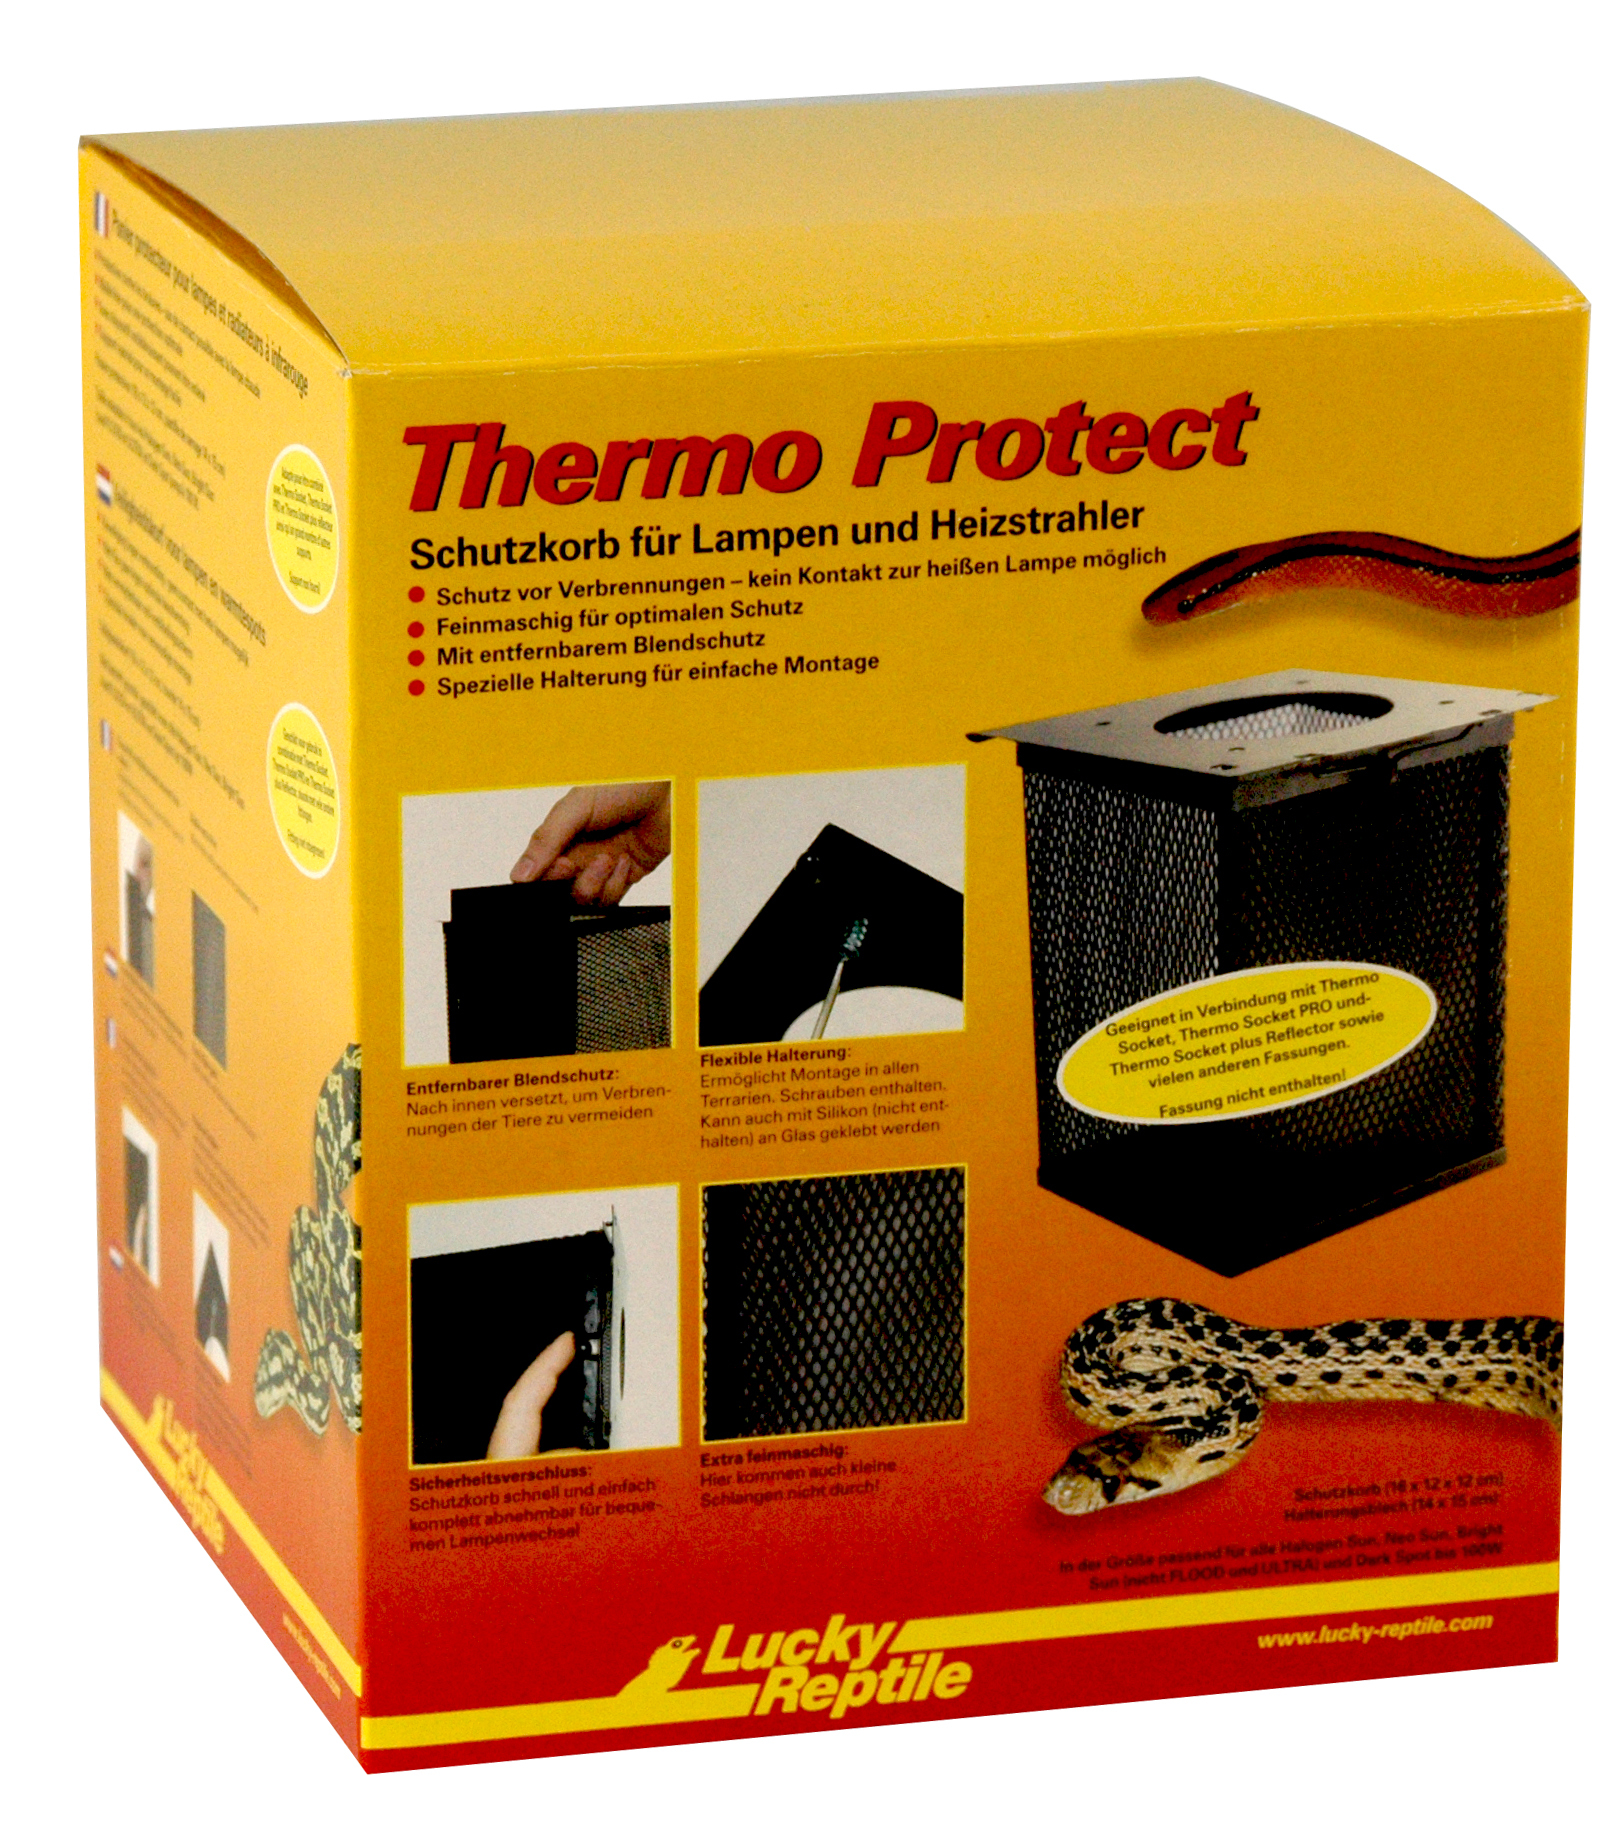 Import-Export Peter Hoch GmbH Thermo Protect – Schutzgitter